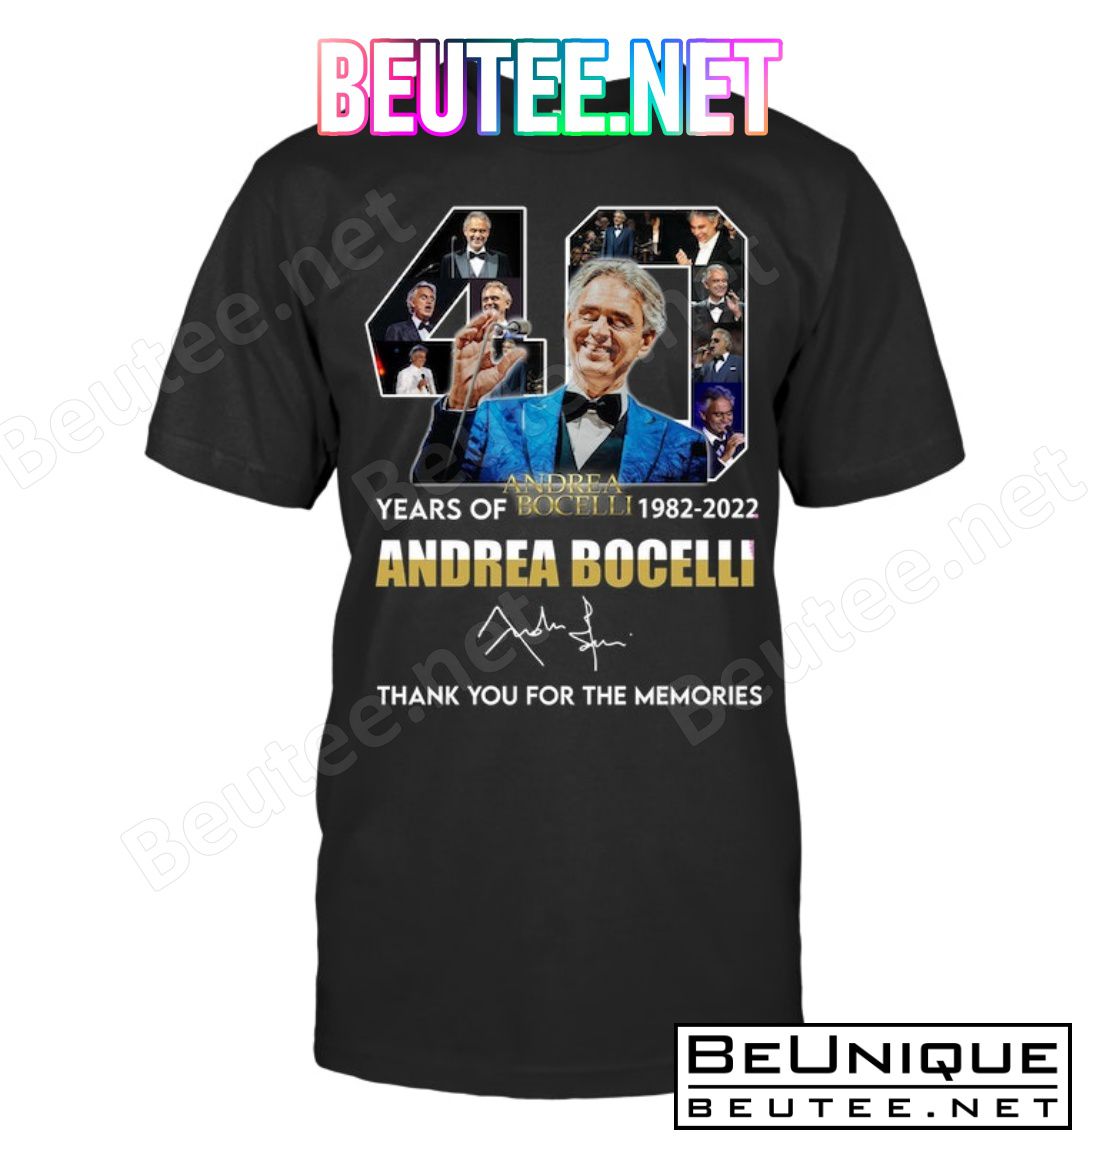 40 Years Of Andrea Bocelli 1982-2022 Signature Thank You For The Memories Shirt